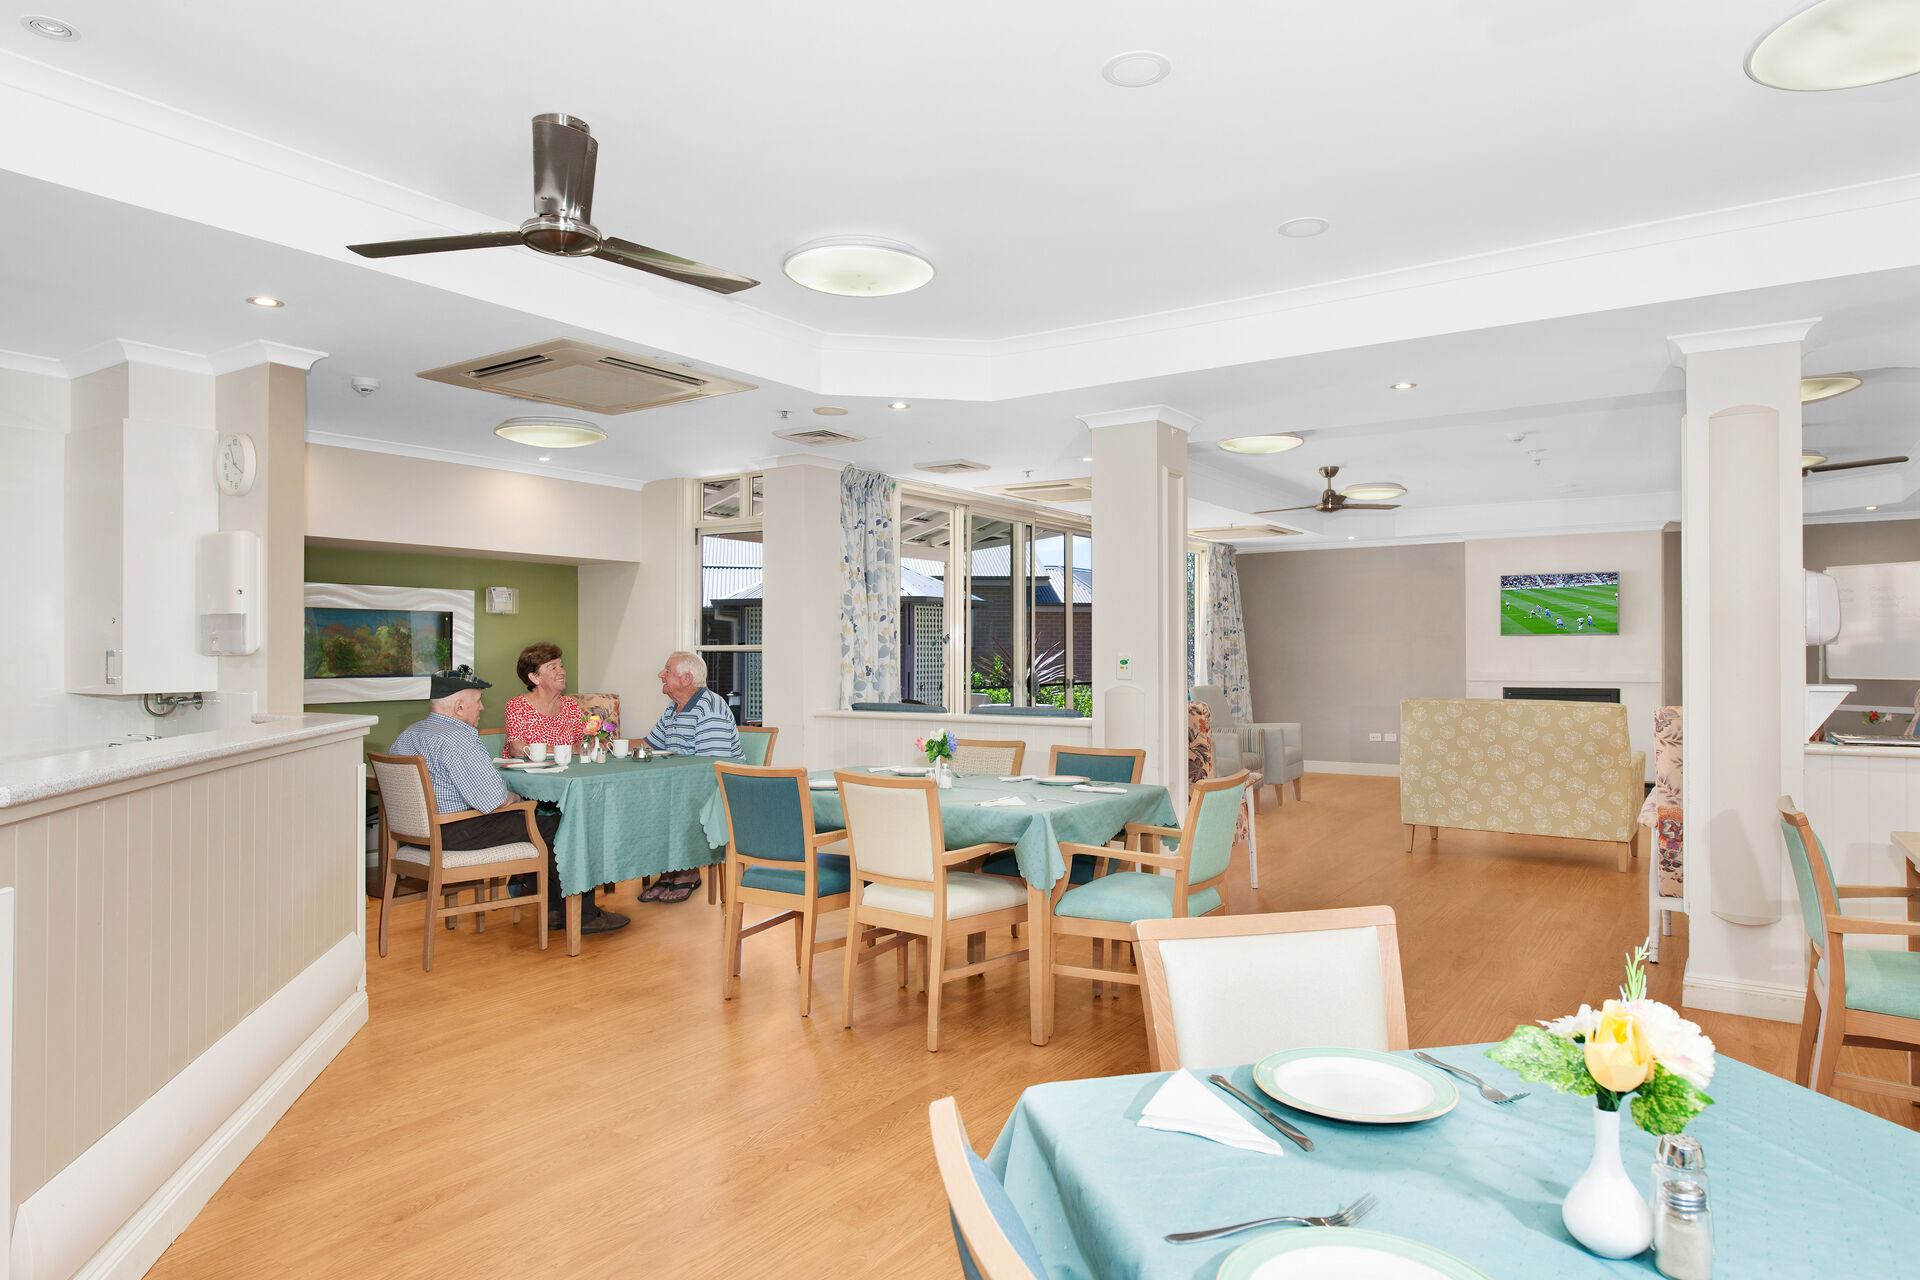 indoor spacious dining room for aged care residents of BaptistCare Kularoo centre aged care home in forster nsw